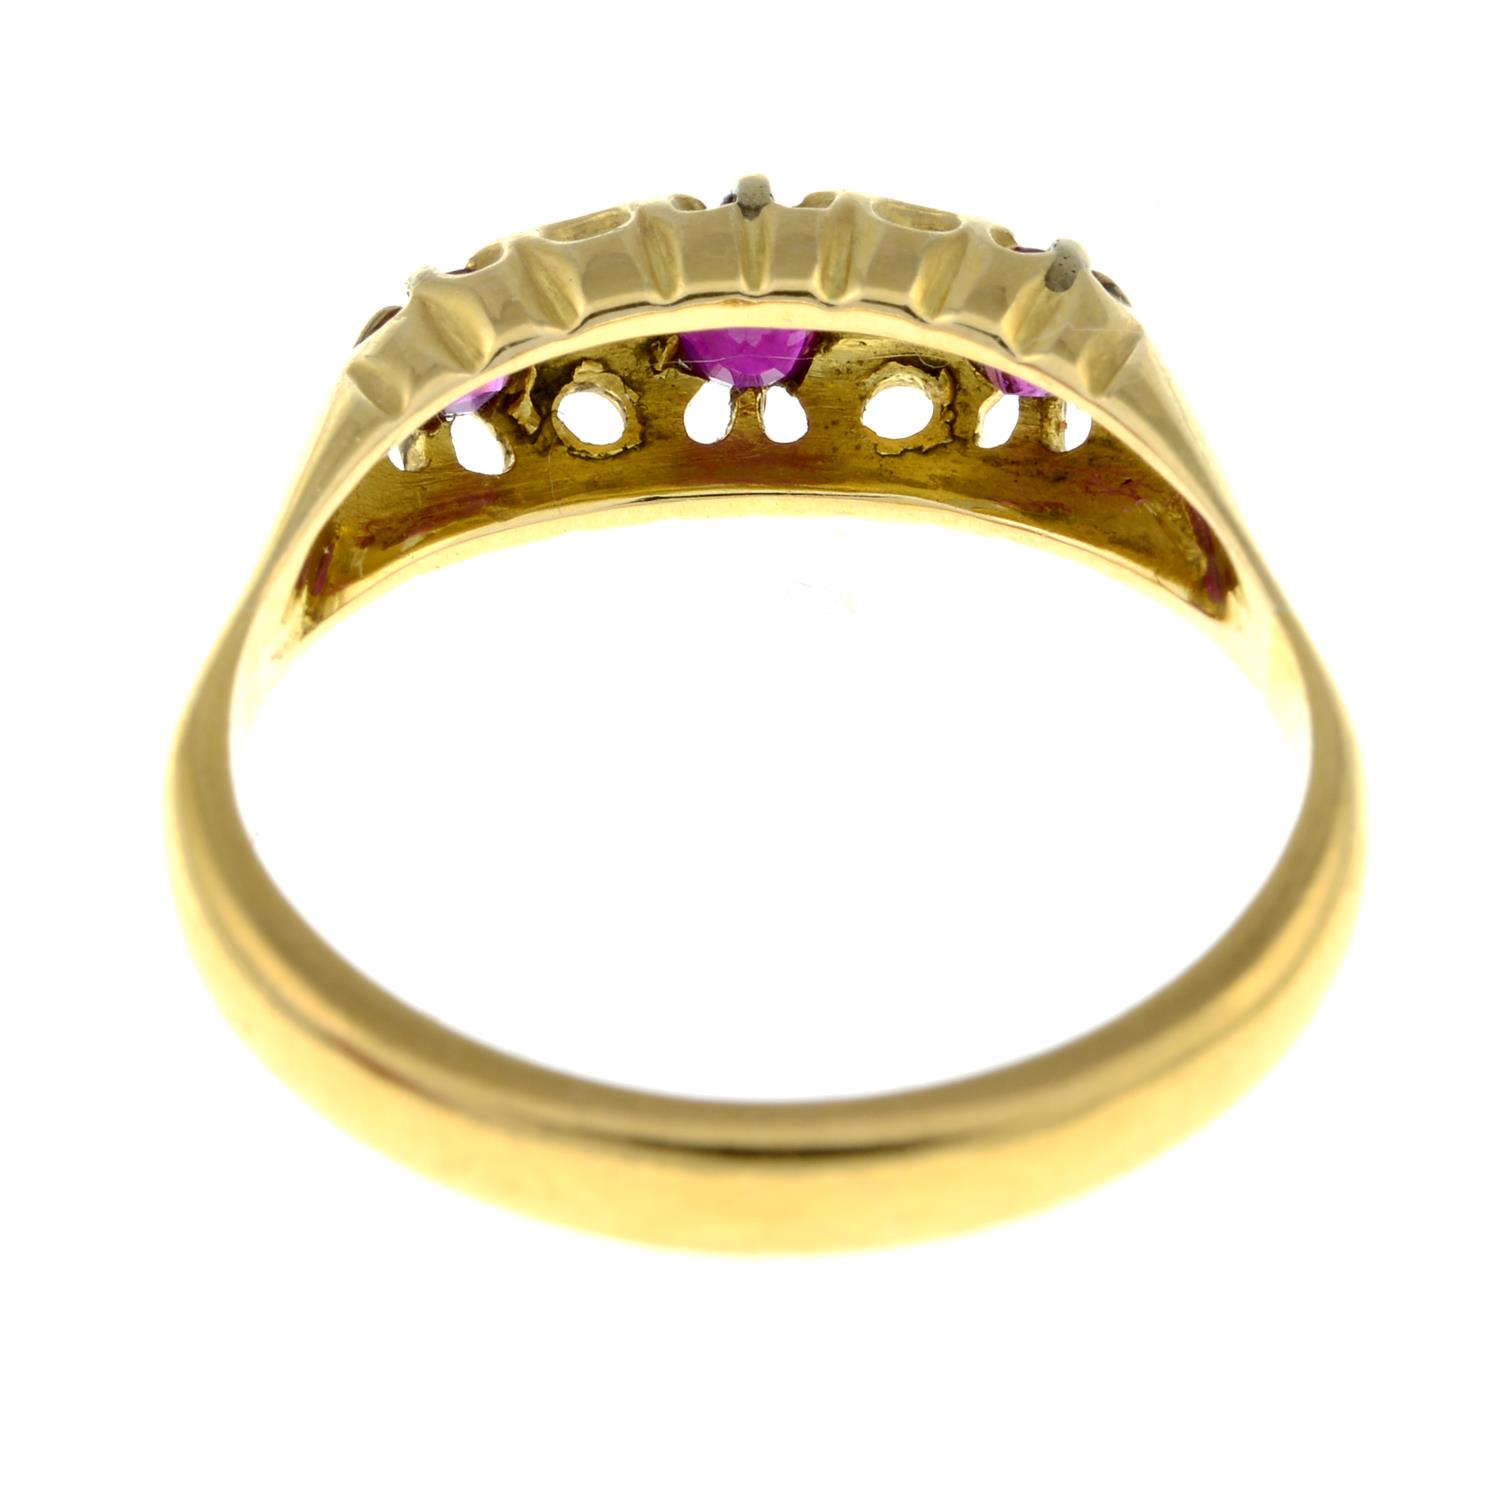 Gem ring with replacement band - Image 2 of 2